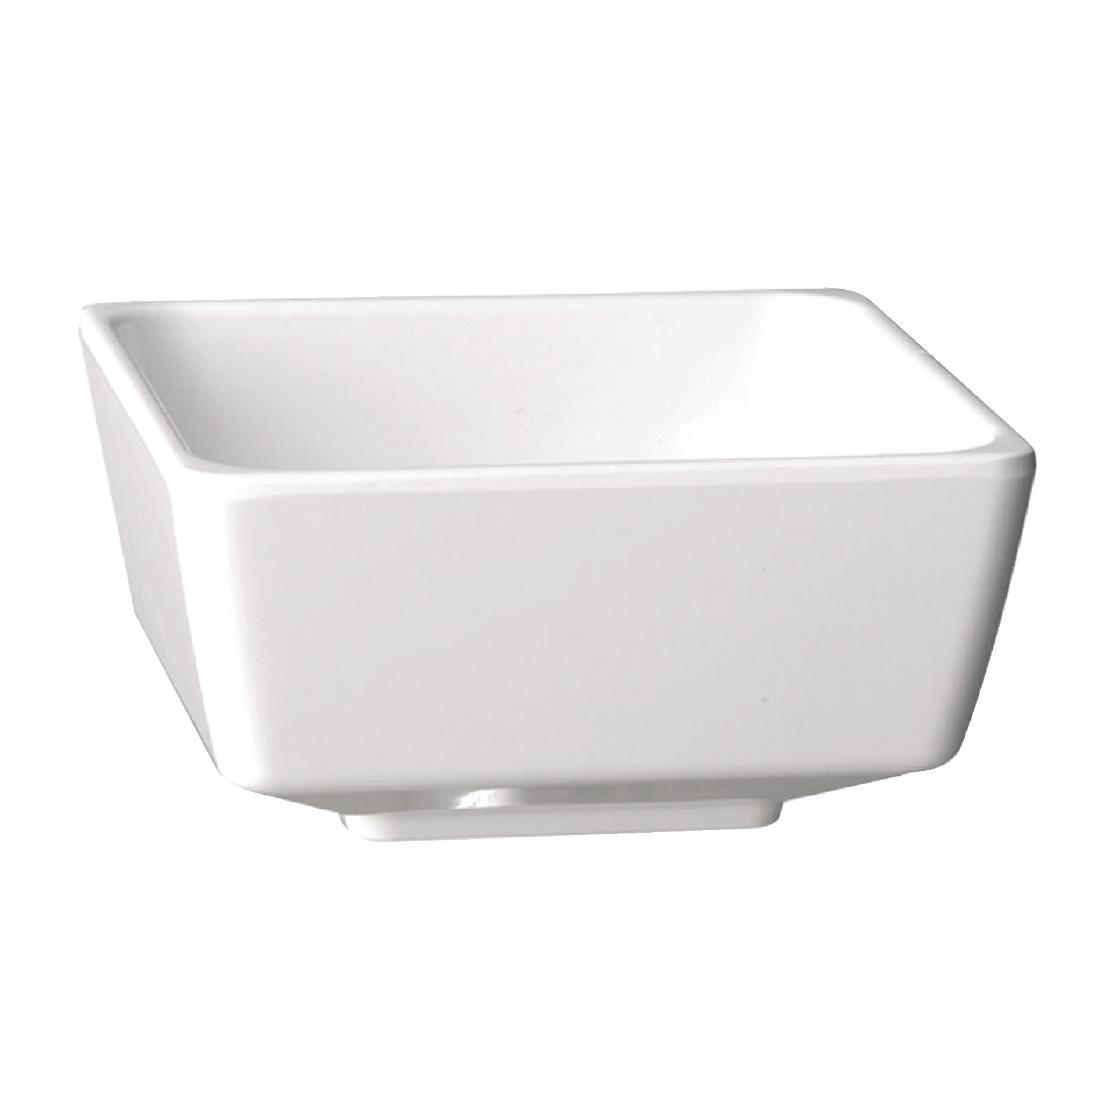 APS Float Square Dipping Bowl White 2in - GF090  - 1